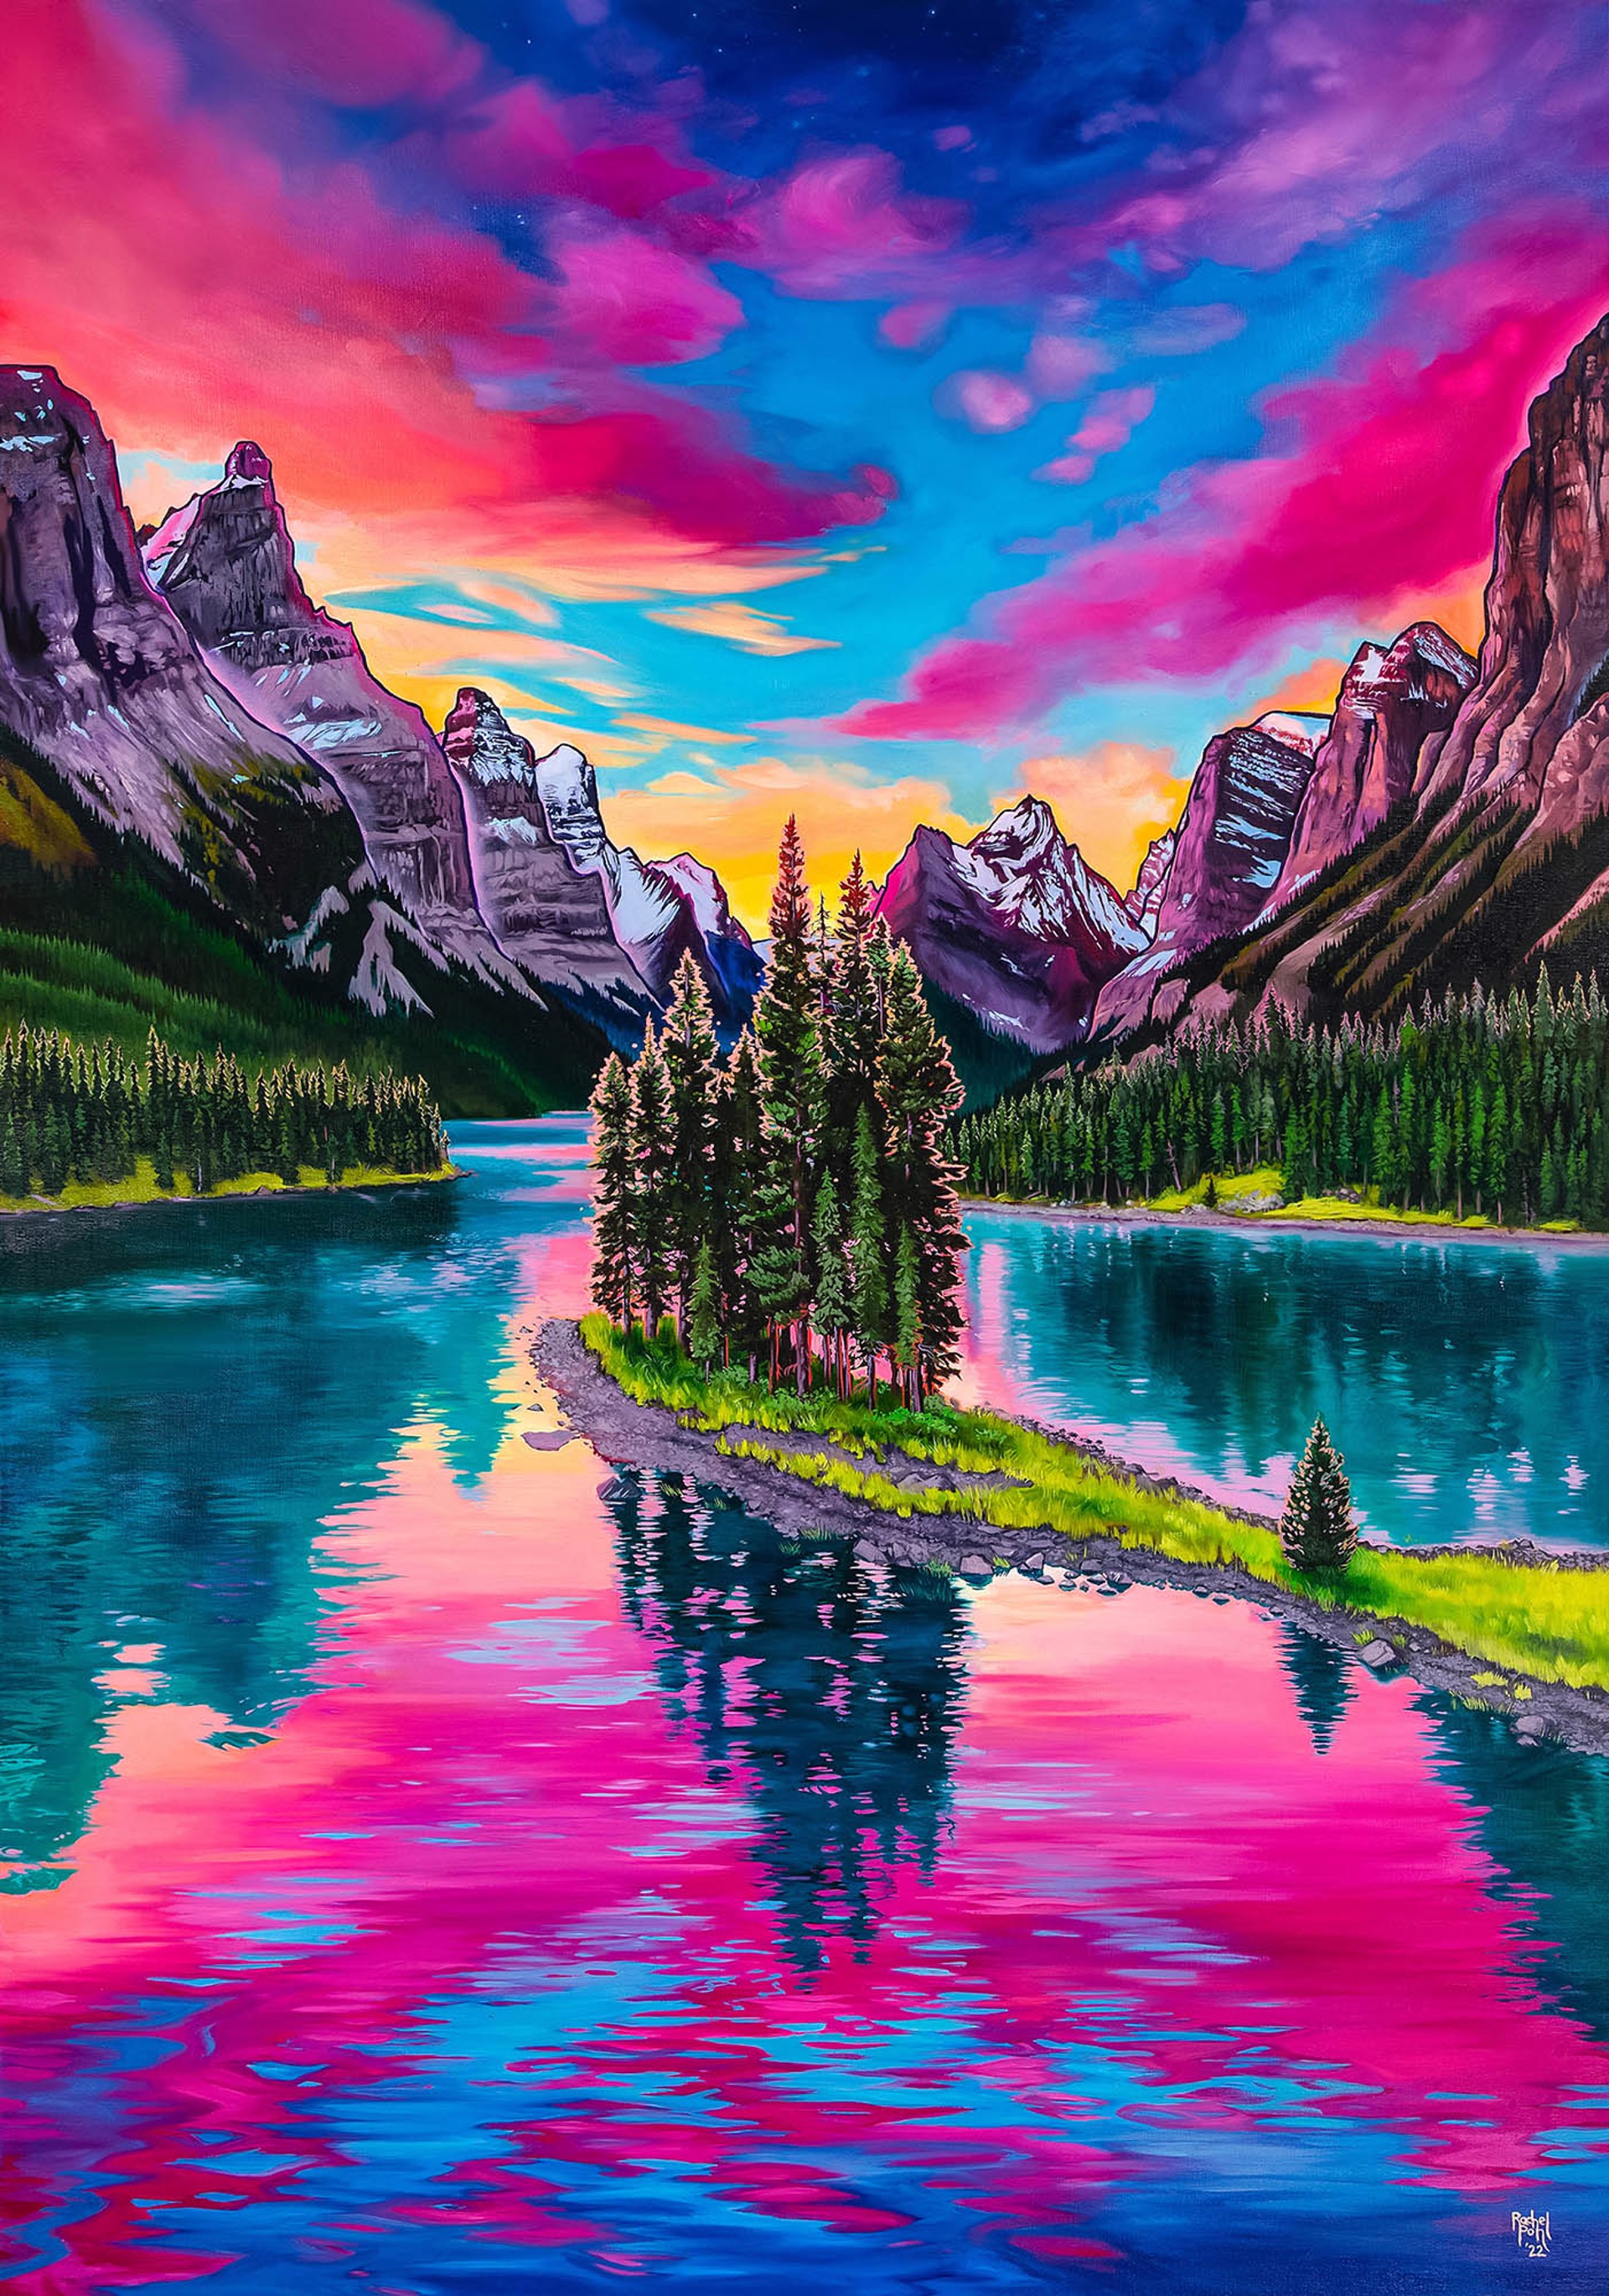 Vibrant Sunset With A Mountain Landscape Colors Reflecting In The Water